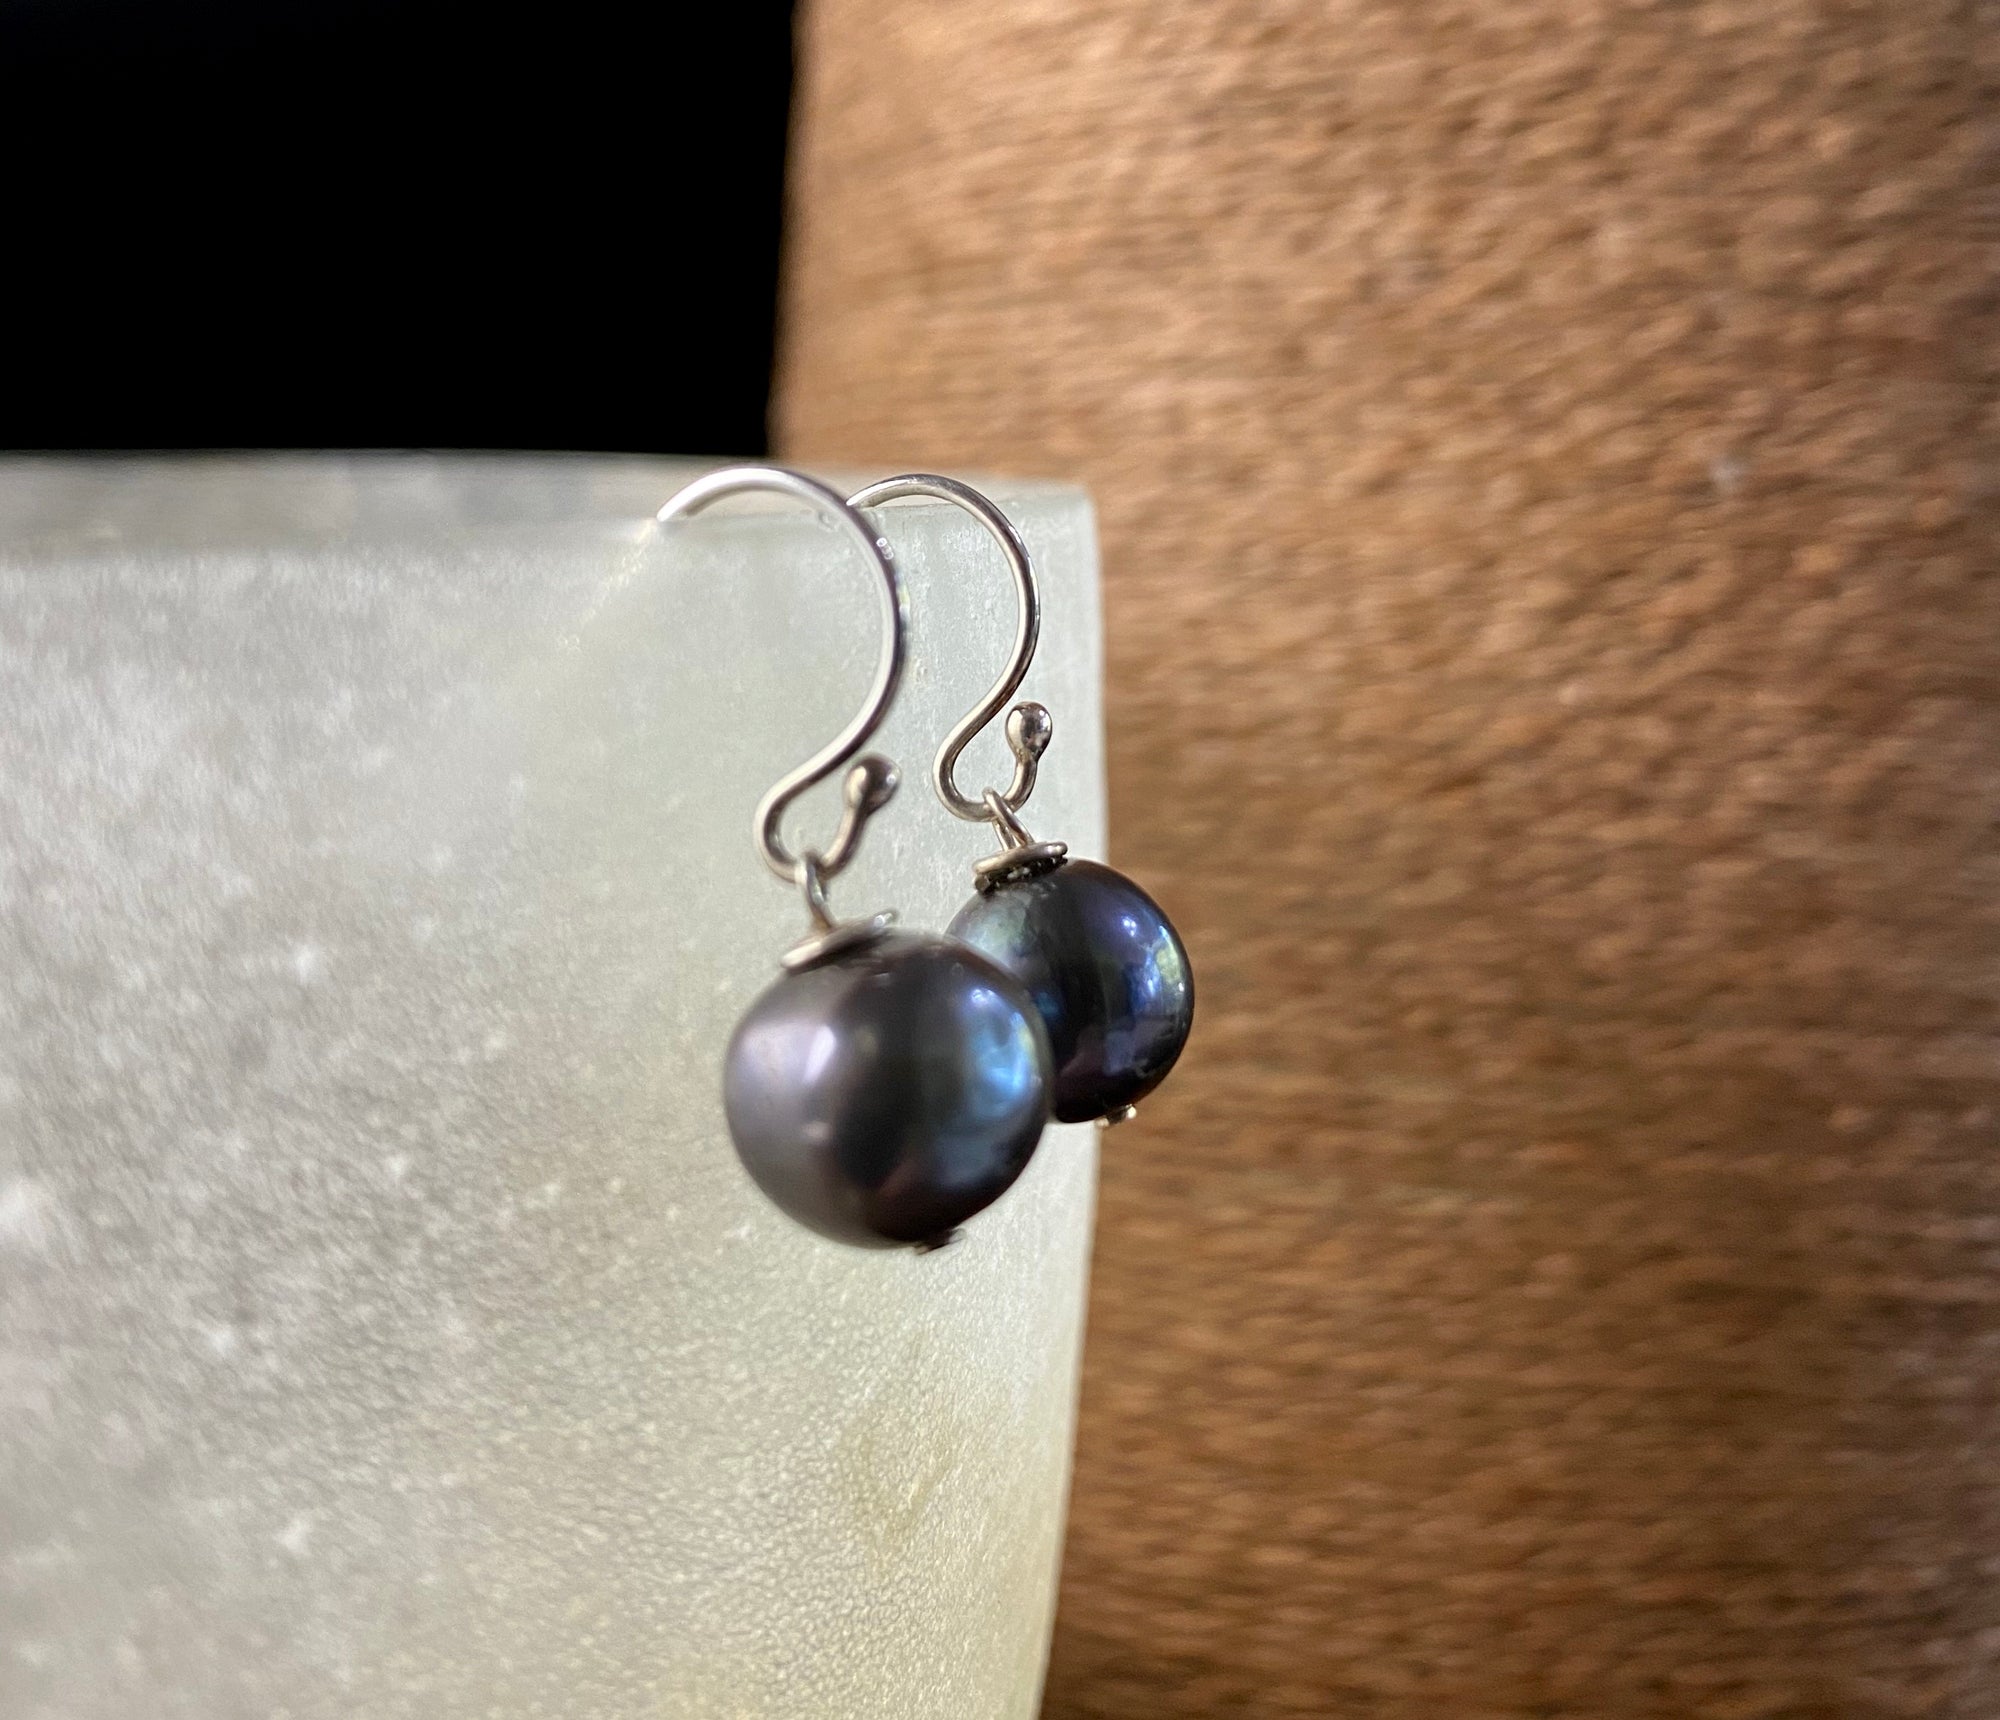 Cultured round black pearl earrings featuring high quality black Burmese pearls 7 mm in diameter and sterling silver hooks